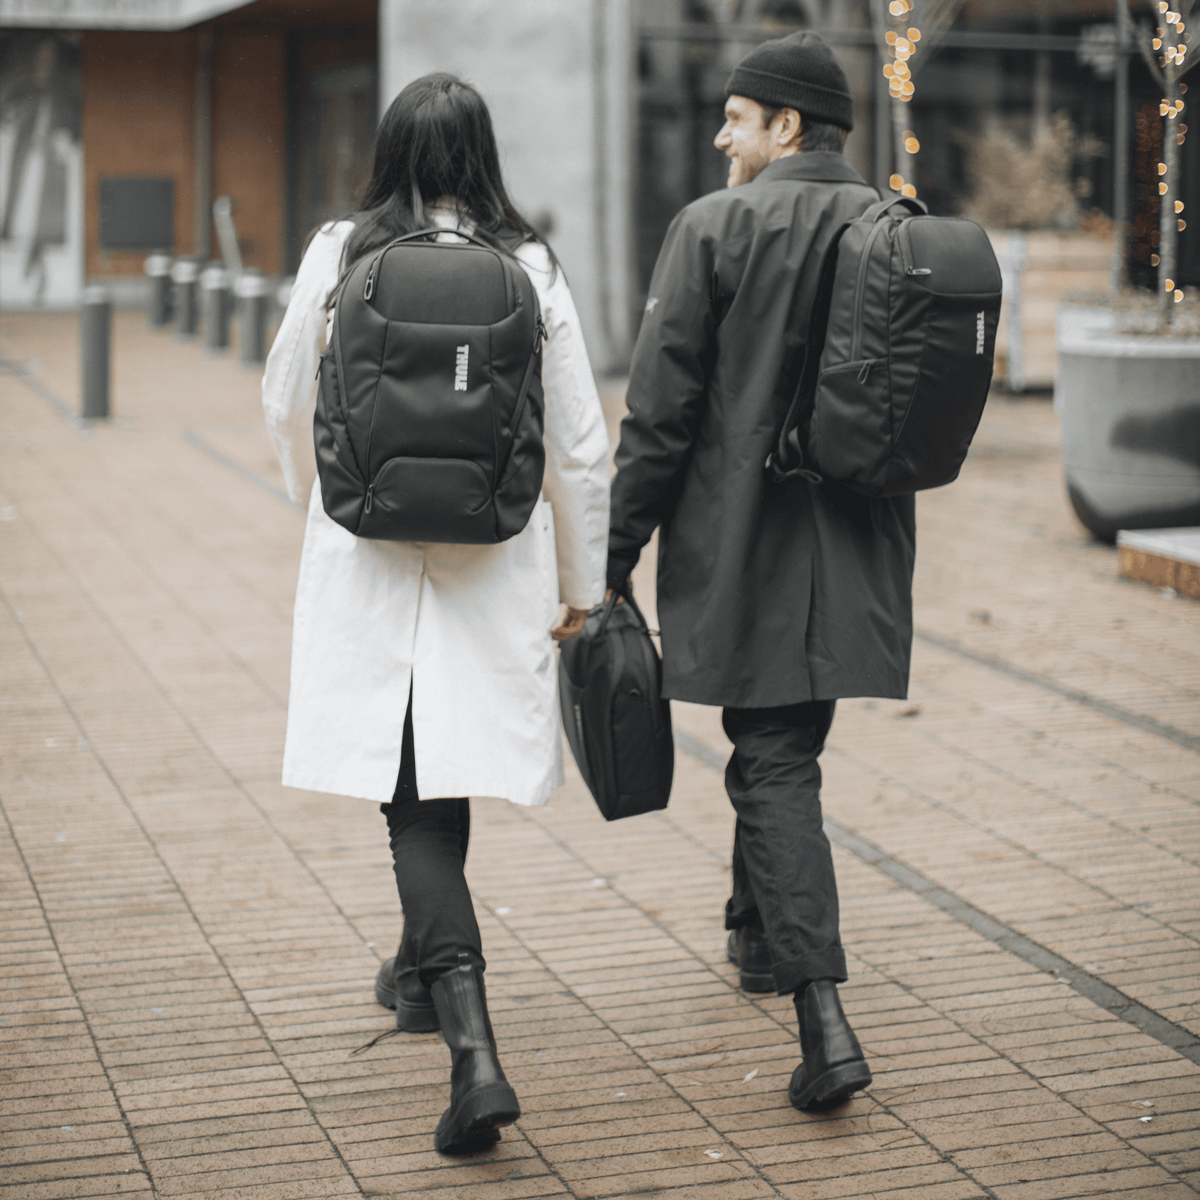 Four people walk down a rainy street wearing black Thule Accent backpacks.